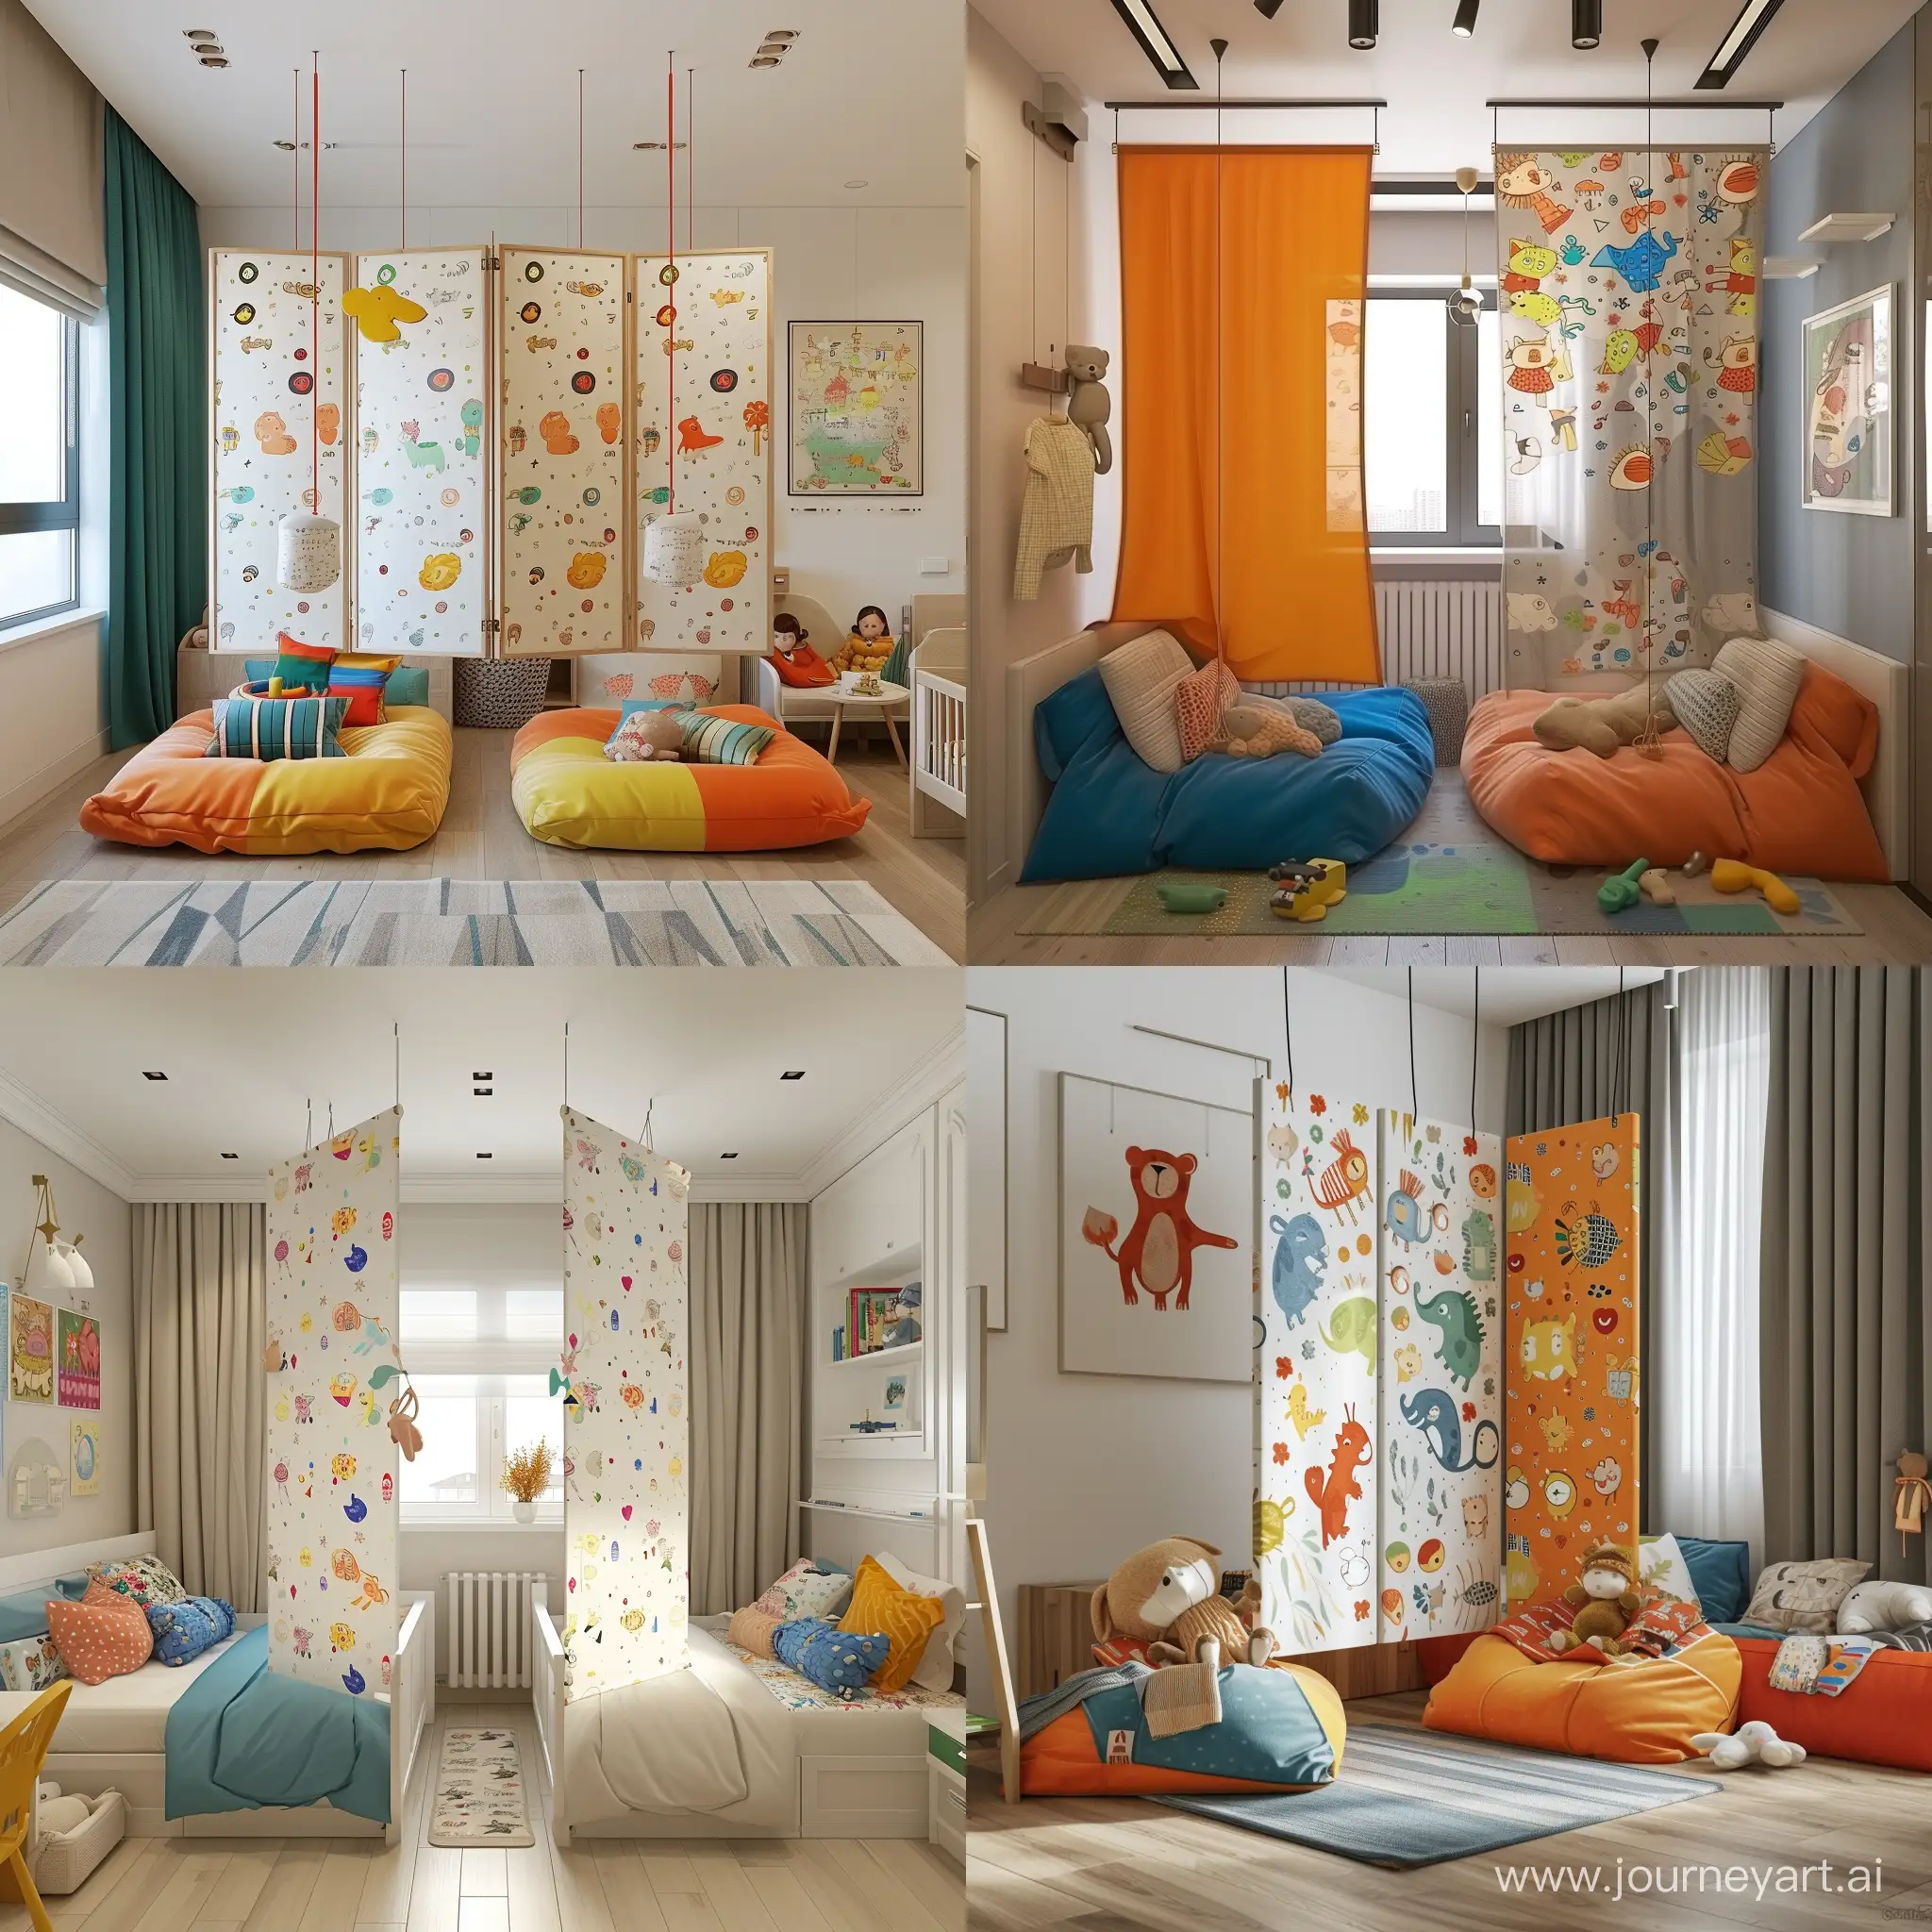 interior design of a cute children's room for two children, in the center of the room a bright accent hanging screen partition dividing the room with a hanging bright screen with a children's pattern